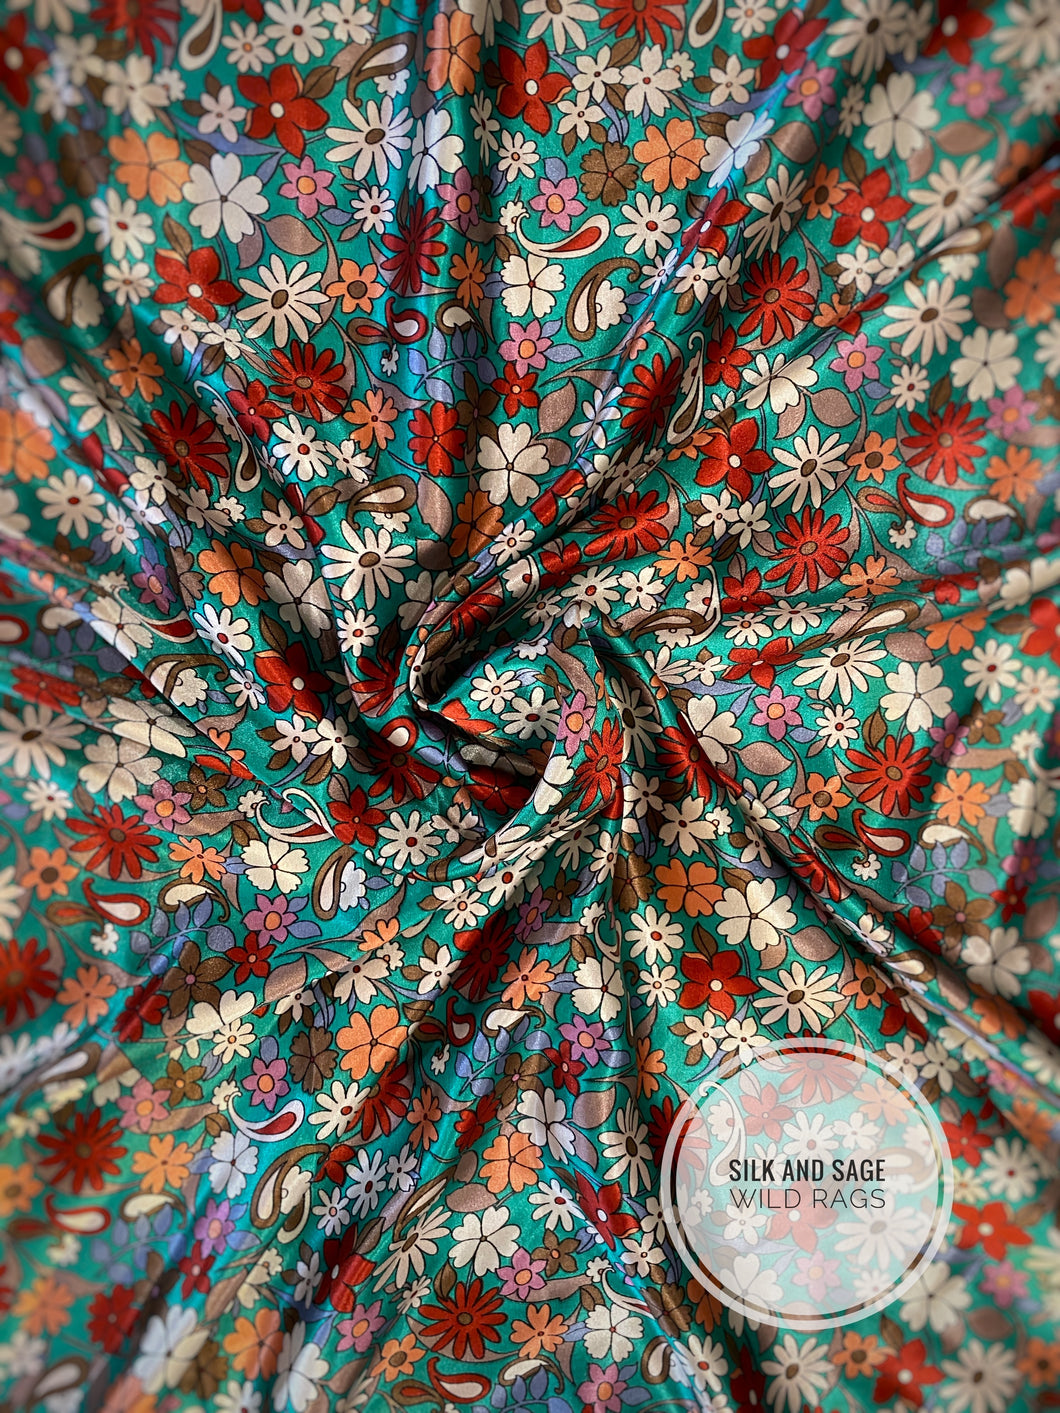 Super fun, floral and paisley charmeuse in teal, turquoise, pink, olive, blue, cream and rust colors